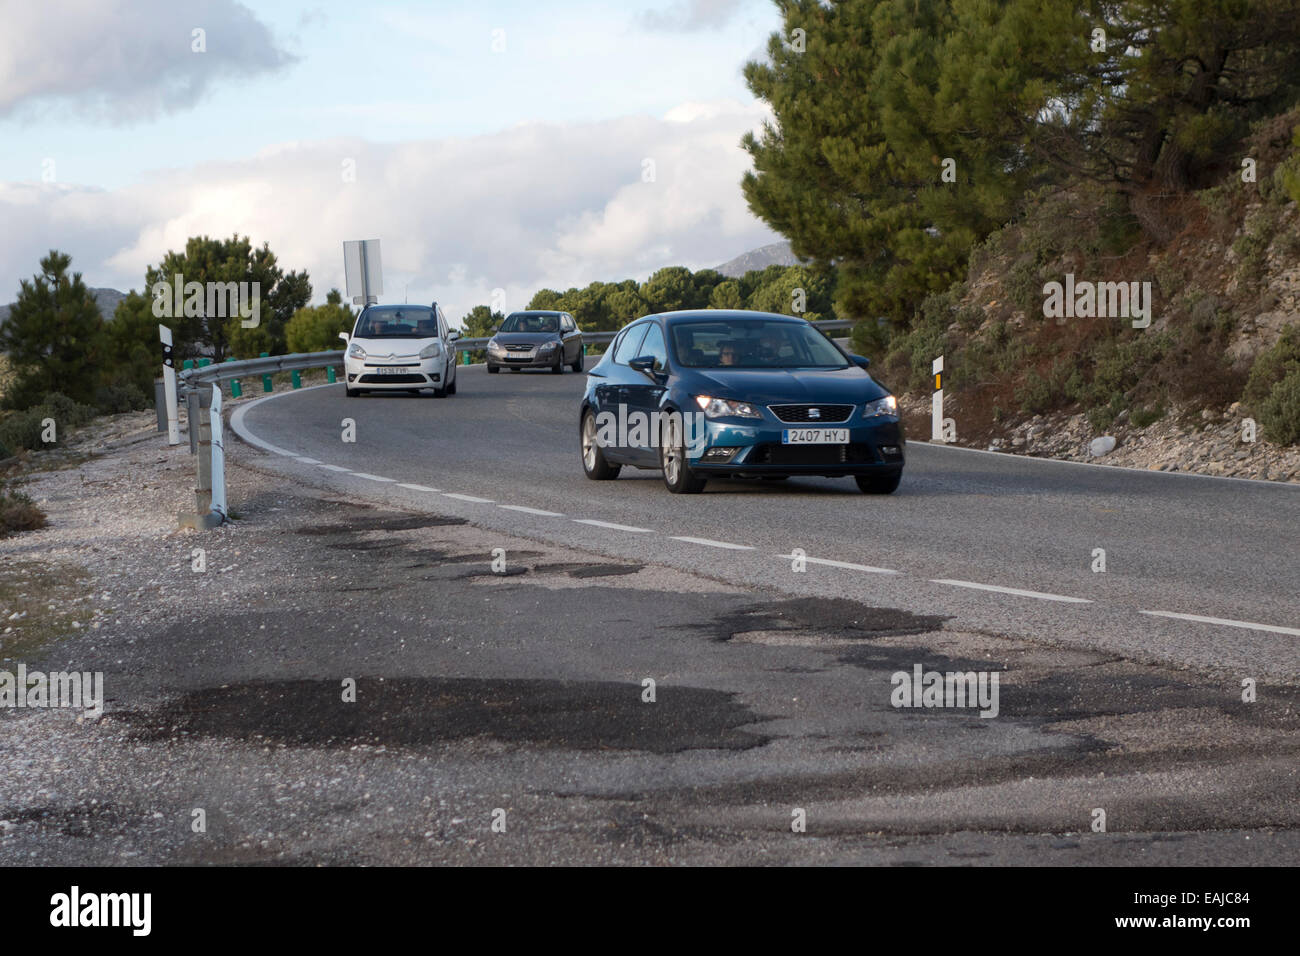 Three Cars Seat Renault driving a winding road curve in mountains of Ronda, Southern Spain. Stock Photo